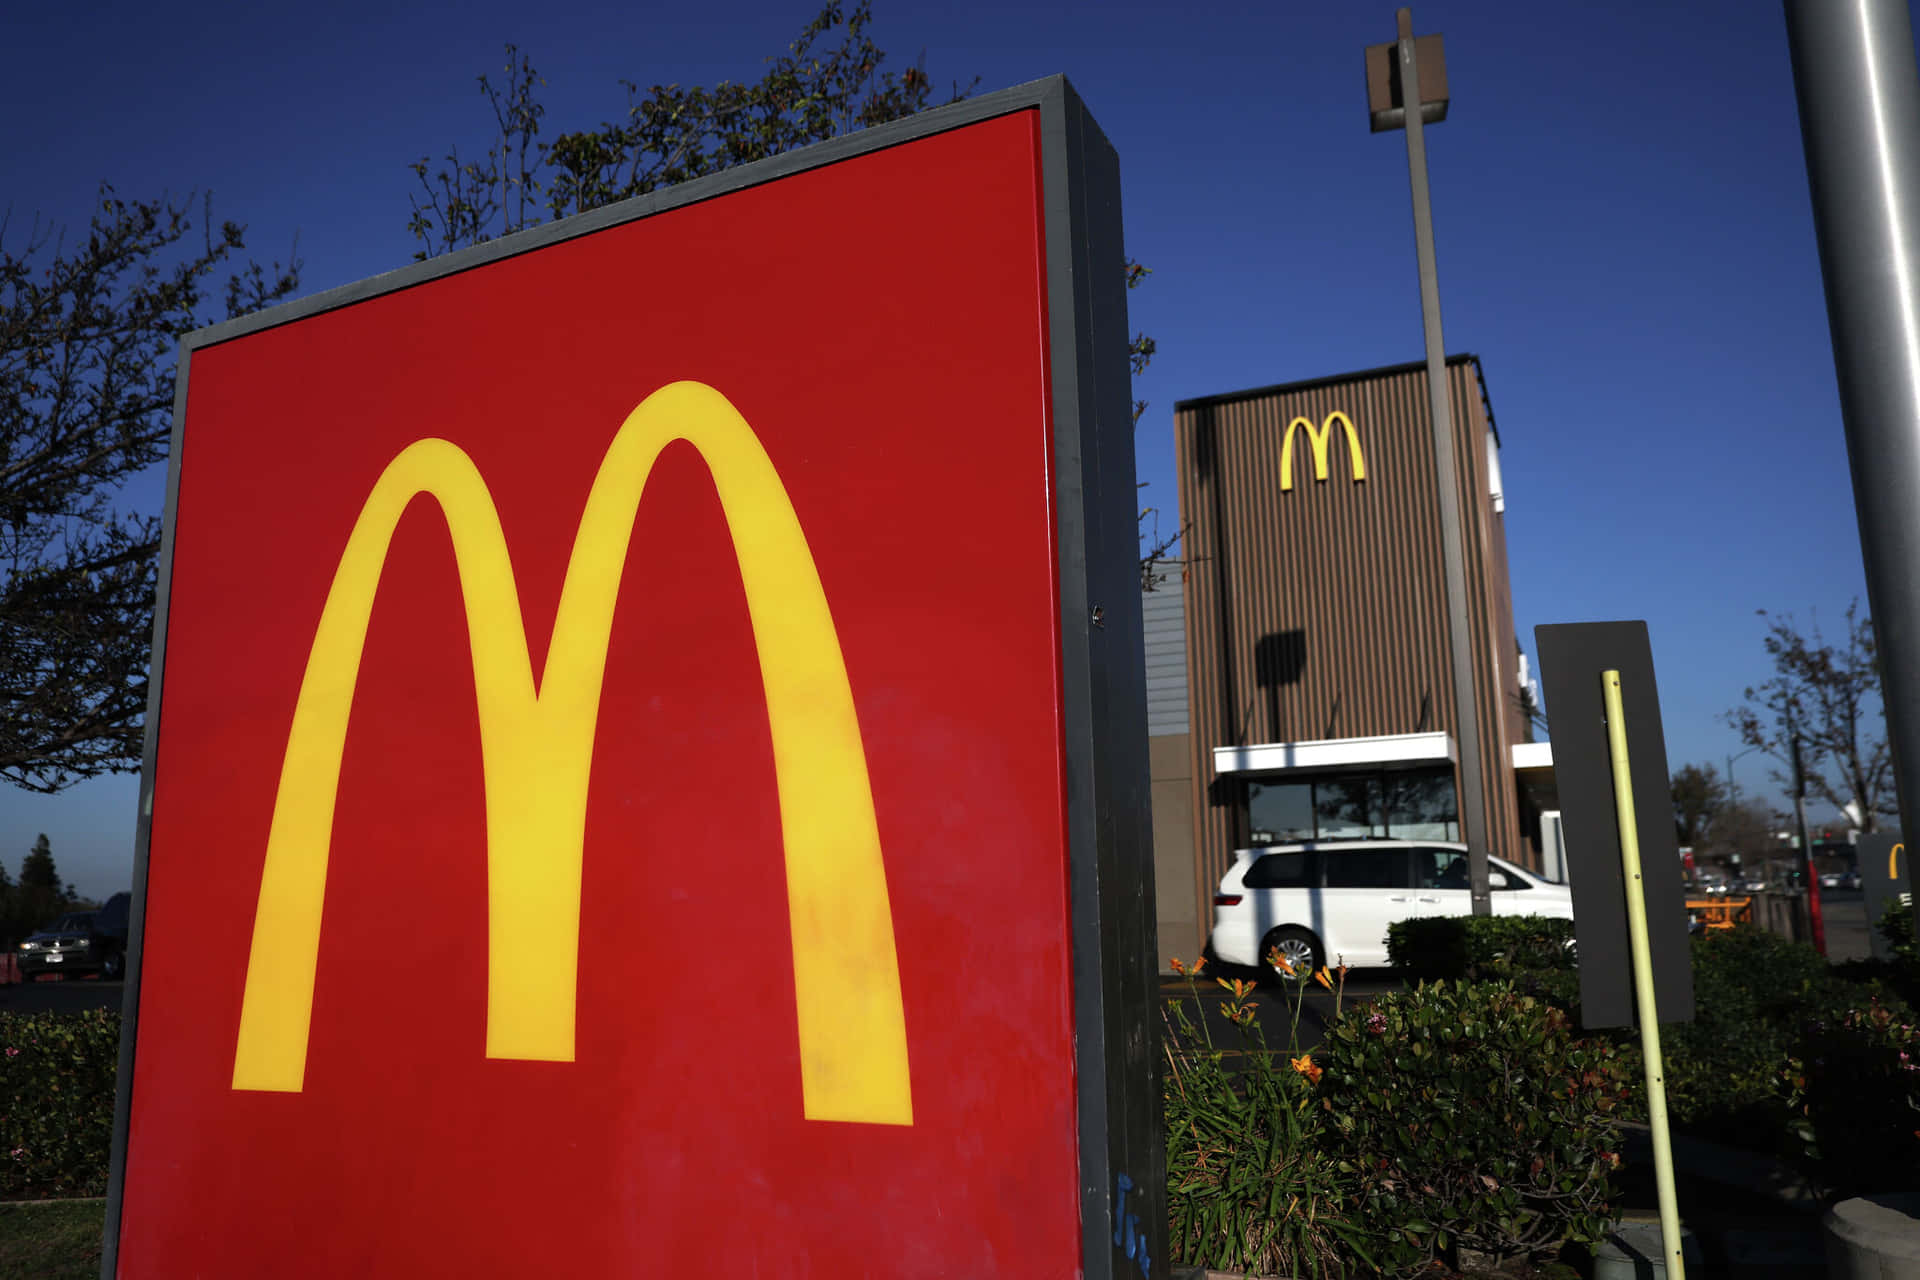 A Mcdonald's Sign Is Seen In Front Of A Building